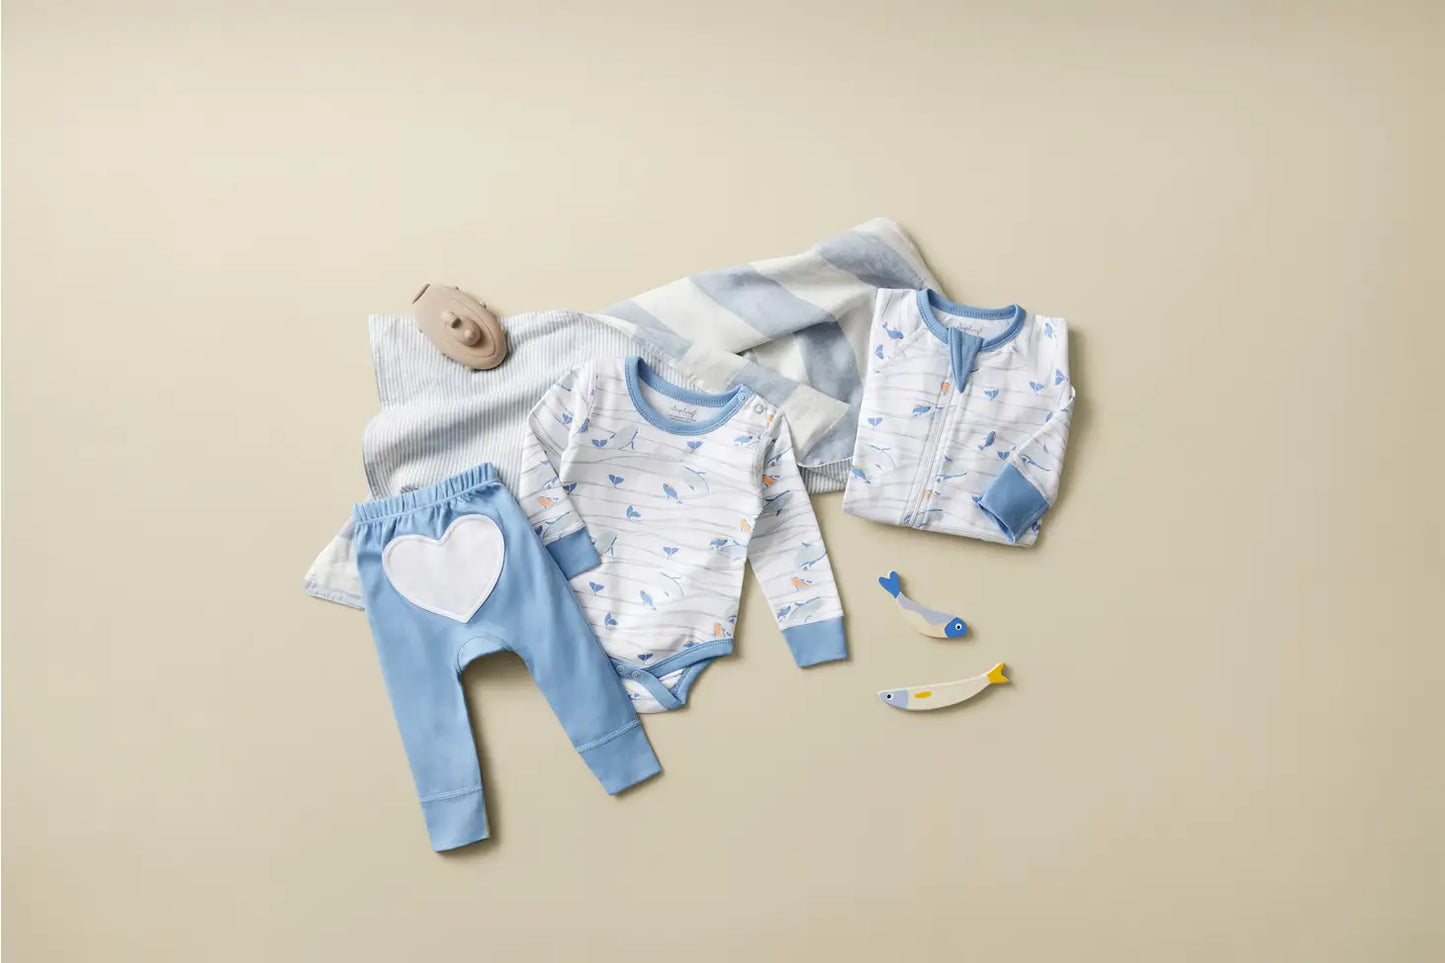 Organic Baby Pants - Heart Applique - Blue - Flat Lay View with Bodysuits